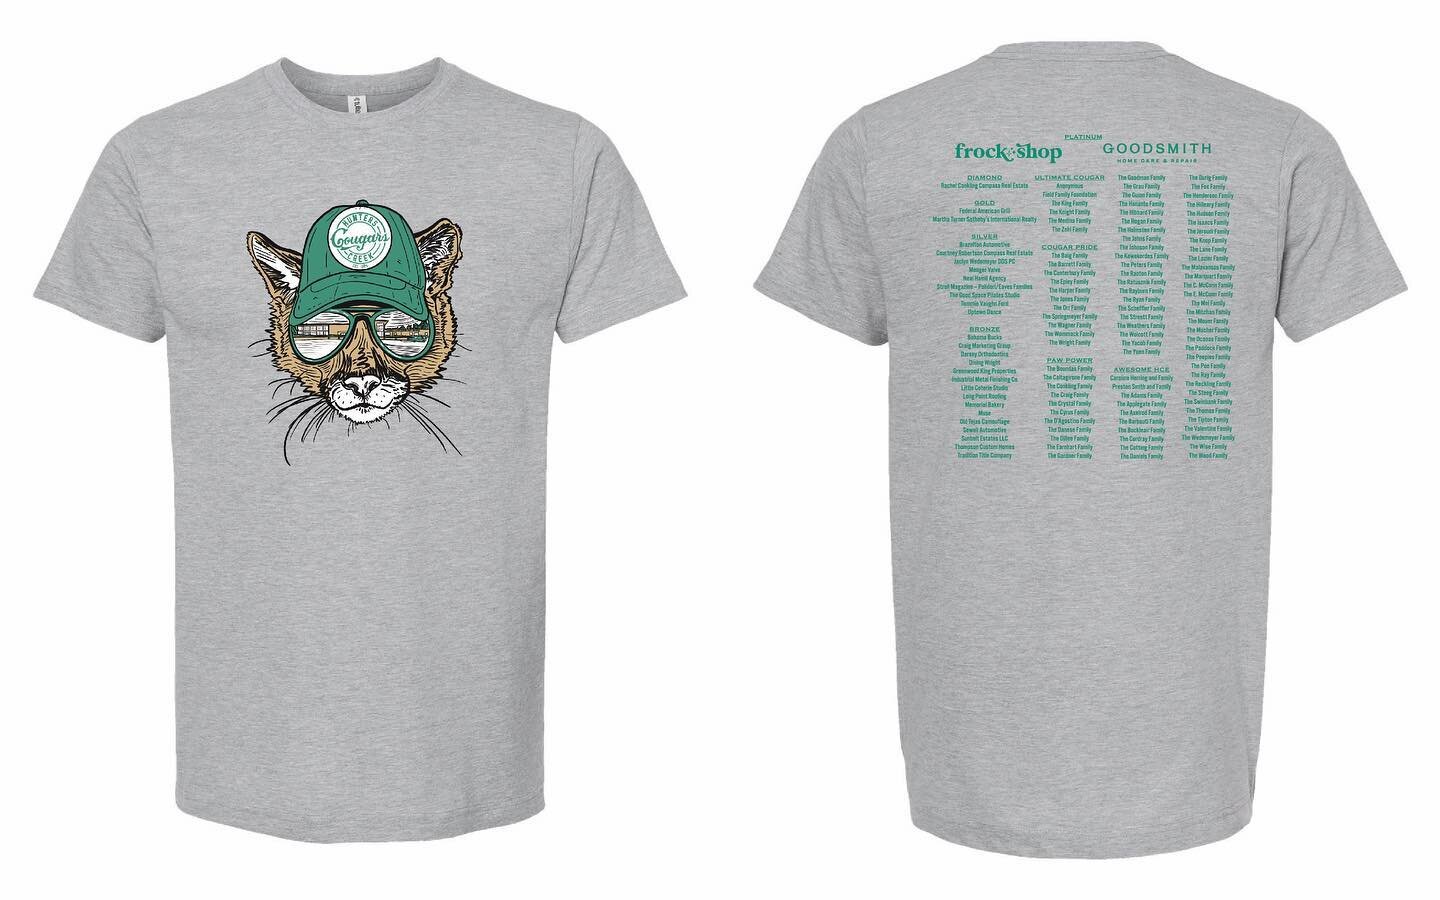 These awesome cougar t-shirts will be given to all 700 HCE students, teachers and staff from the HCE PTA! I love the cougar art by @artxerin - it turned out even better than I imagined 🐾💚🤍
(They&rsquo;ll be ready in about 2 weeks 😉)
@hunterscreek